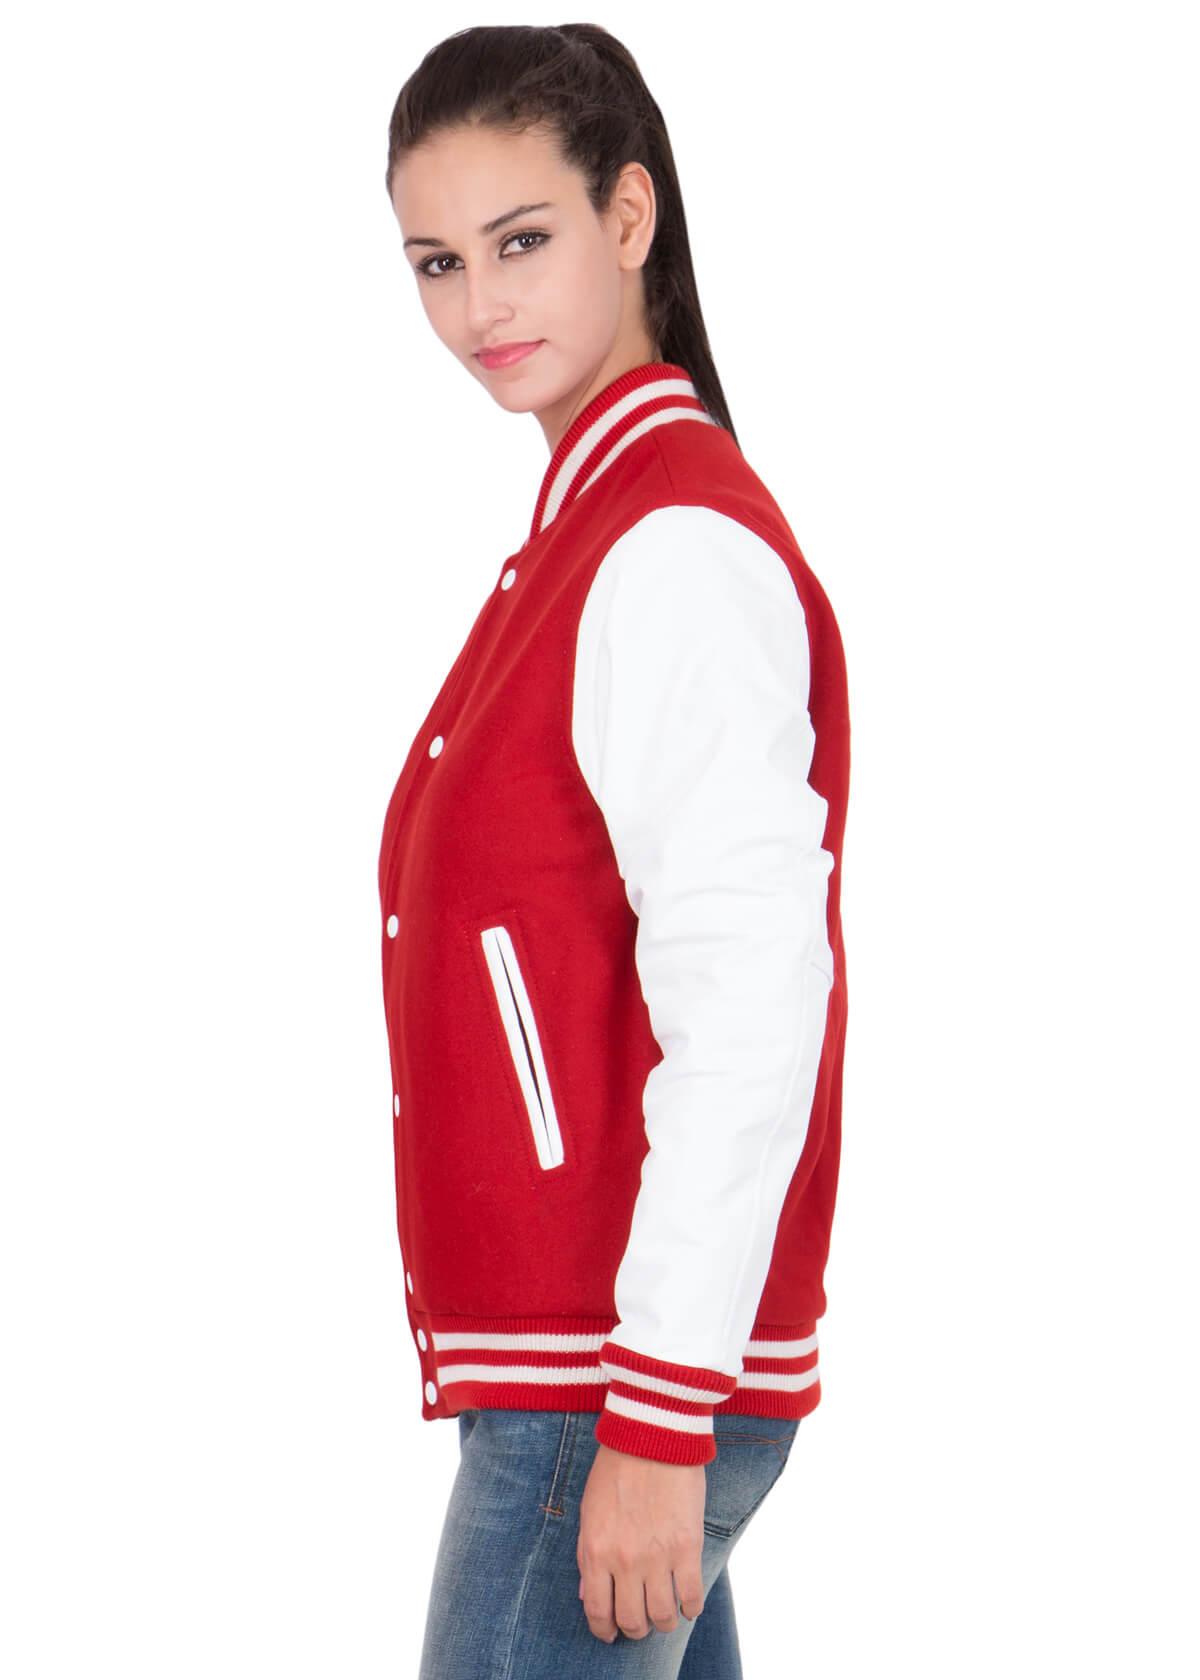 Womens Scarlet Red Varsity Jacket with White Leather Sleeves-6